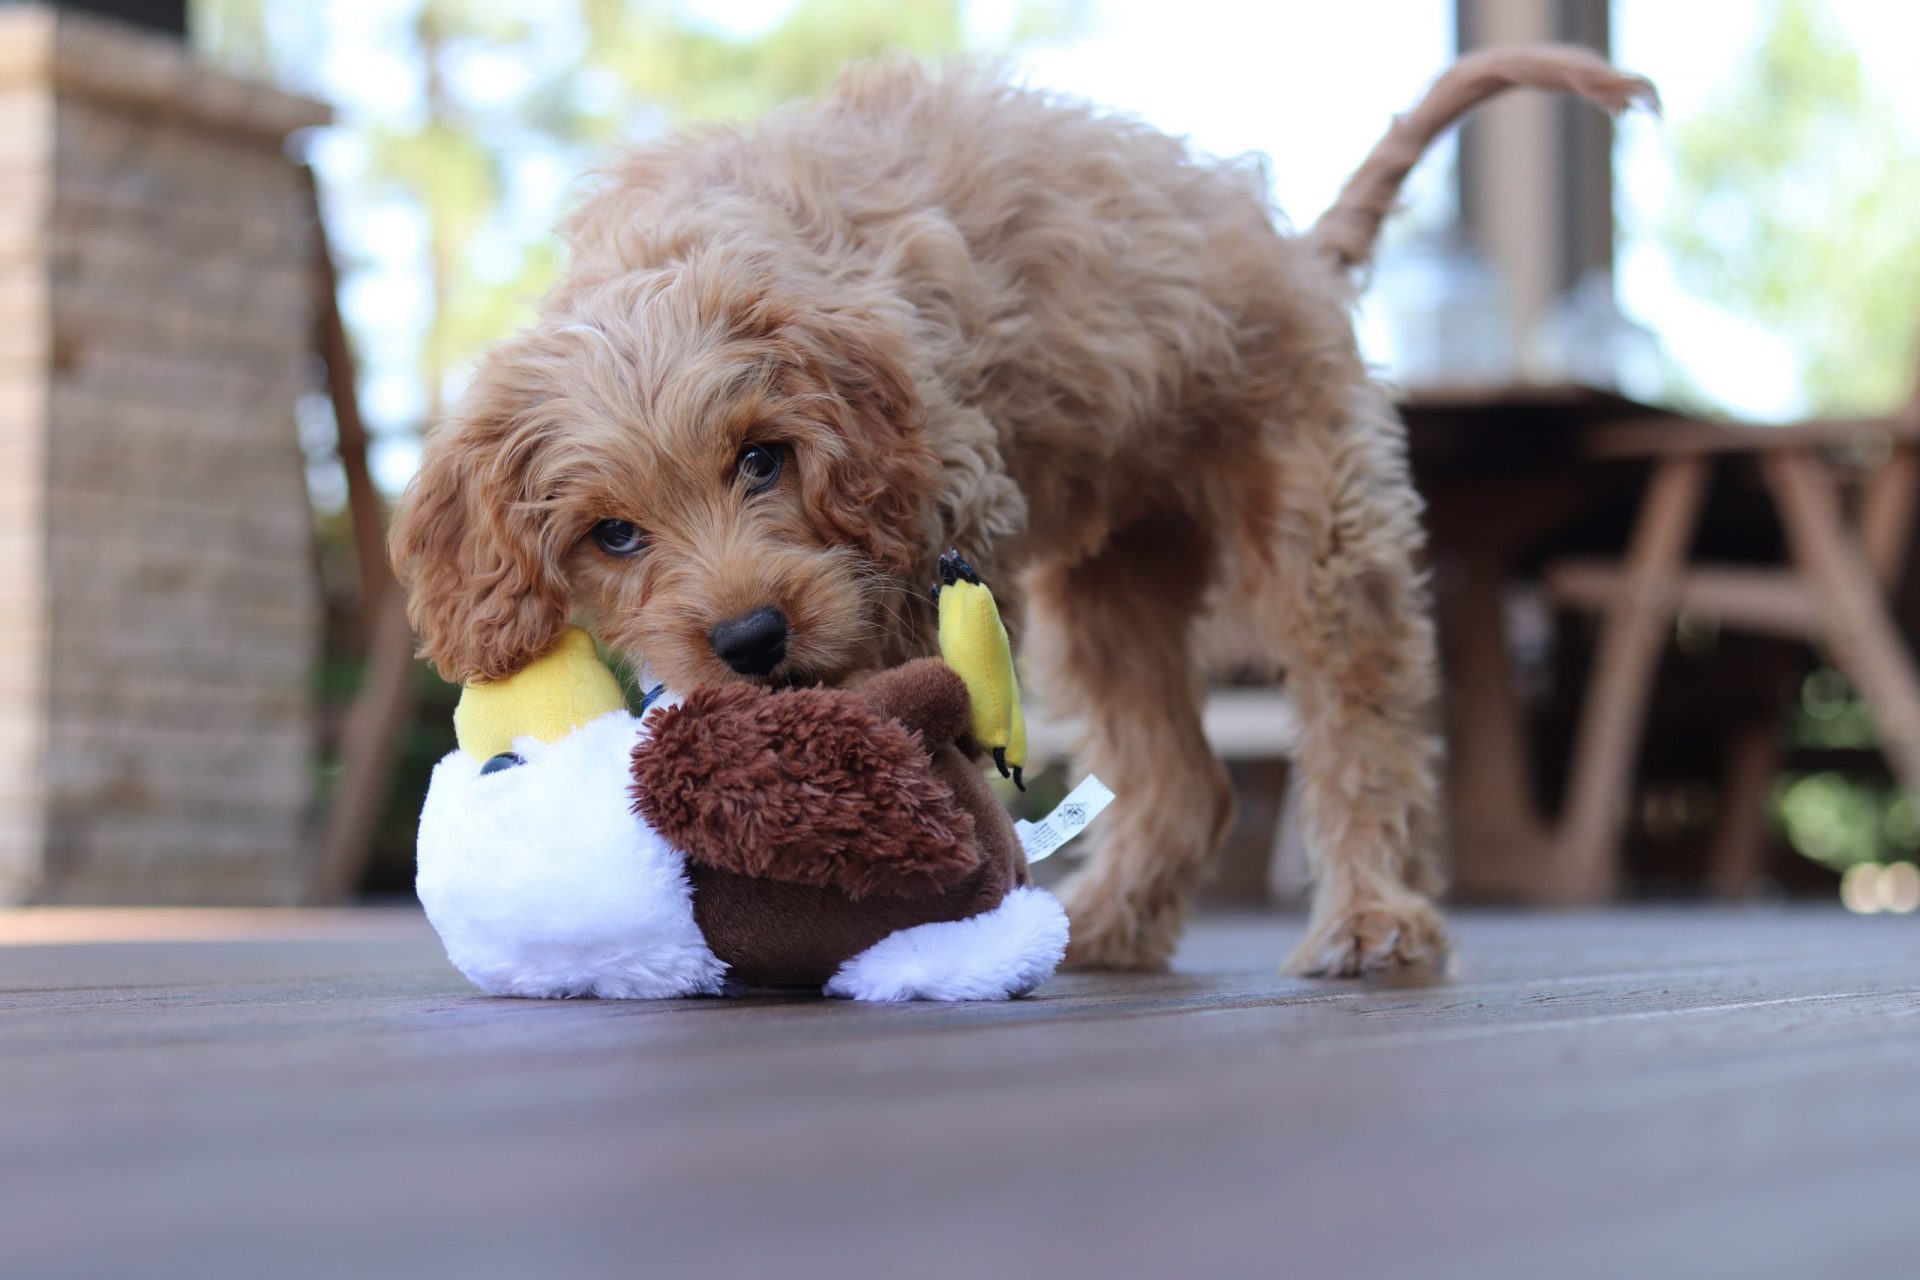 Goldendoodle puppy biting toy